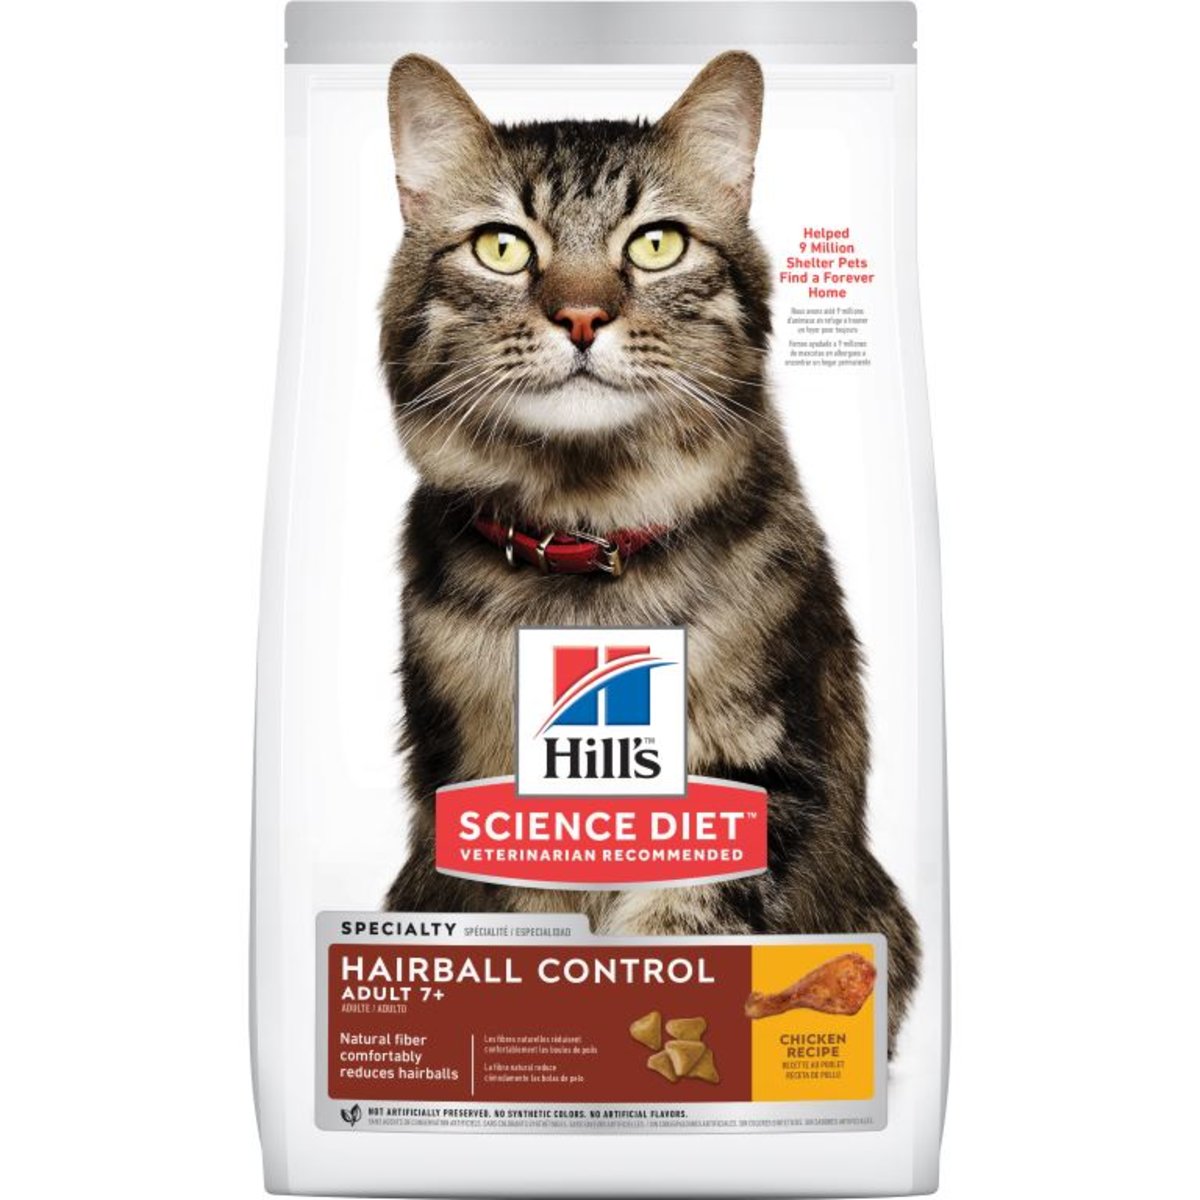 Feline Adult Over 7 Age Hairball Control Recipe Dry Cat Food (3.5LB)